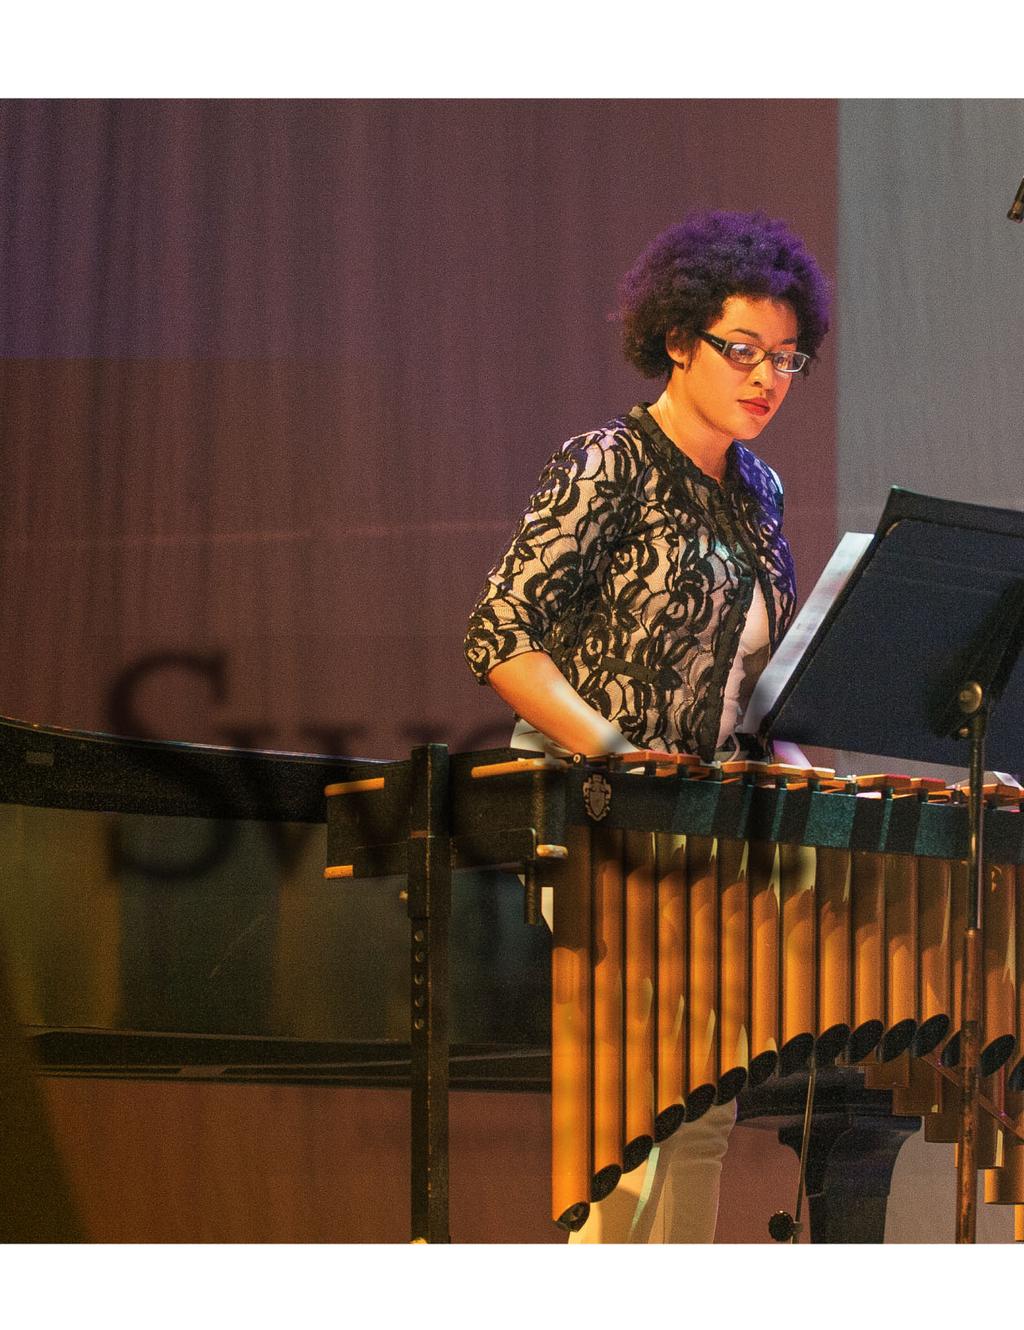 Students perform during a recent jazz concert, demonstrating the diversity of talent in the Department of Music.